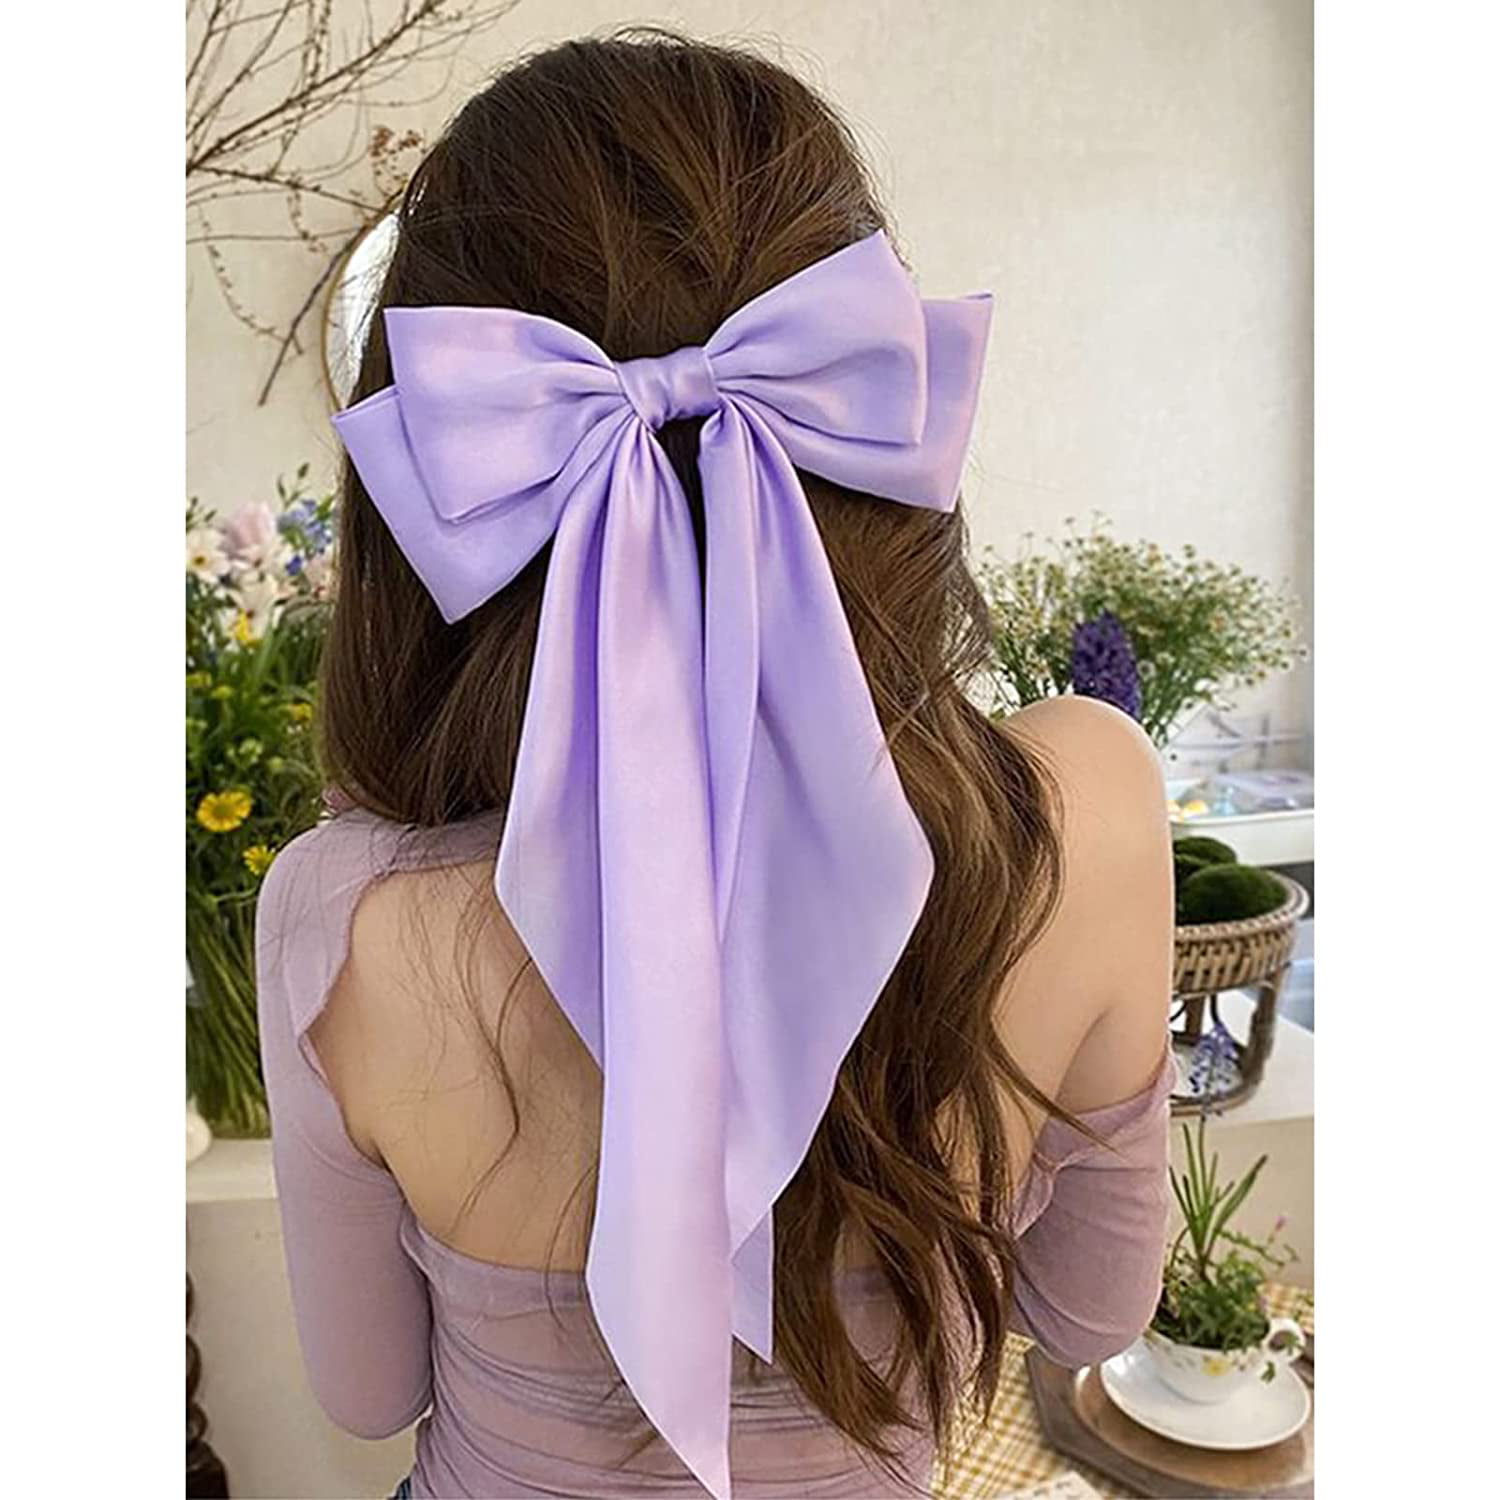 Ahoney 6pcs Silky Satin Hair Bows Clips for Women Girls, Hair Bows Ribbons  for Hair Bowknot Hair Clips with Long Tail, Cute Aesthetic Long Hair